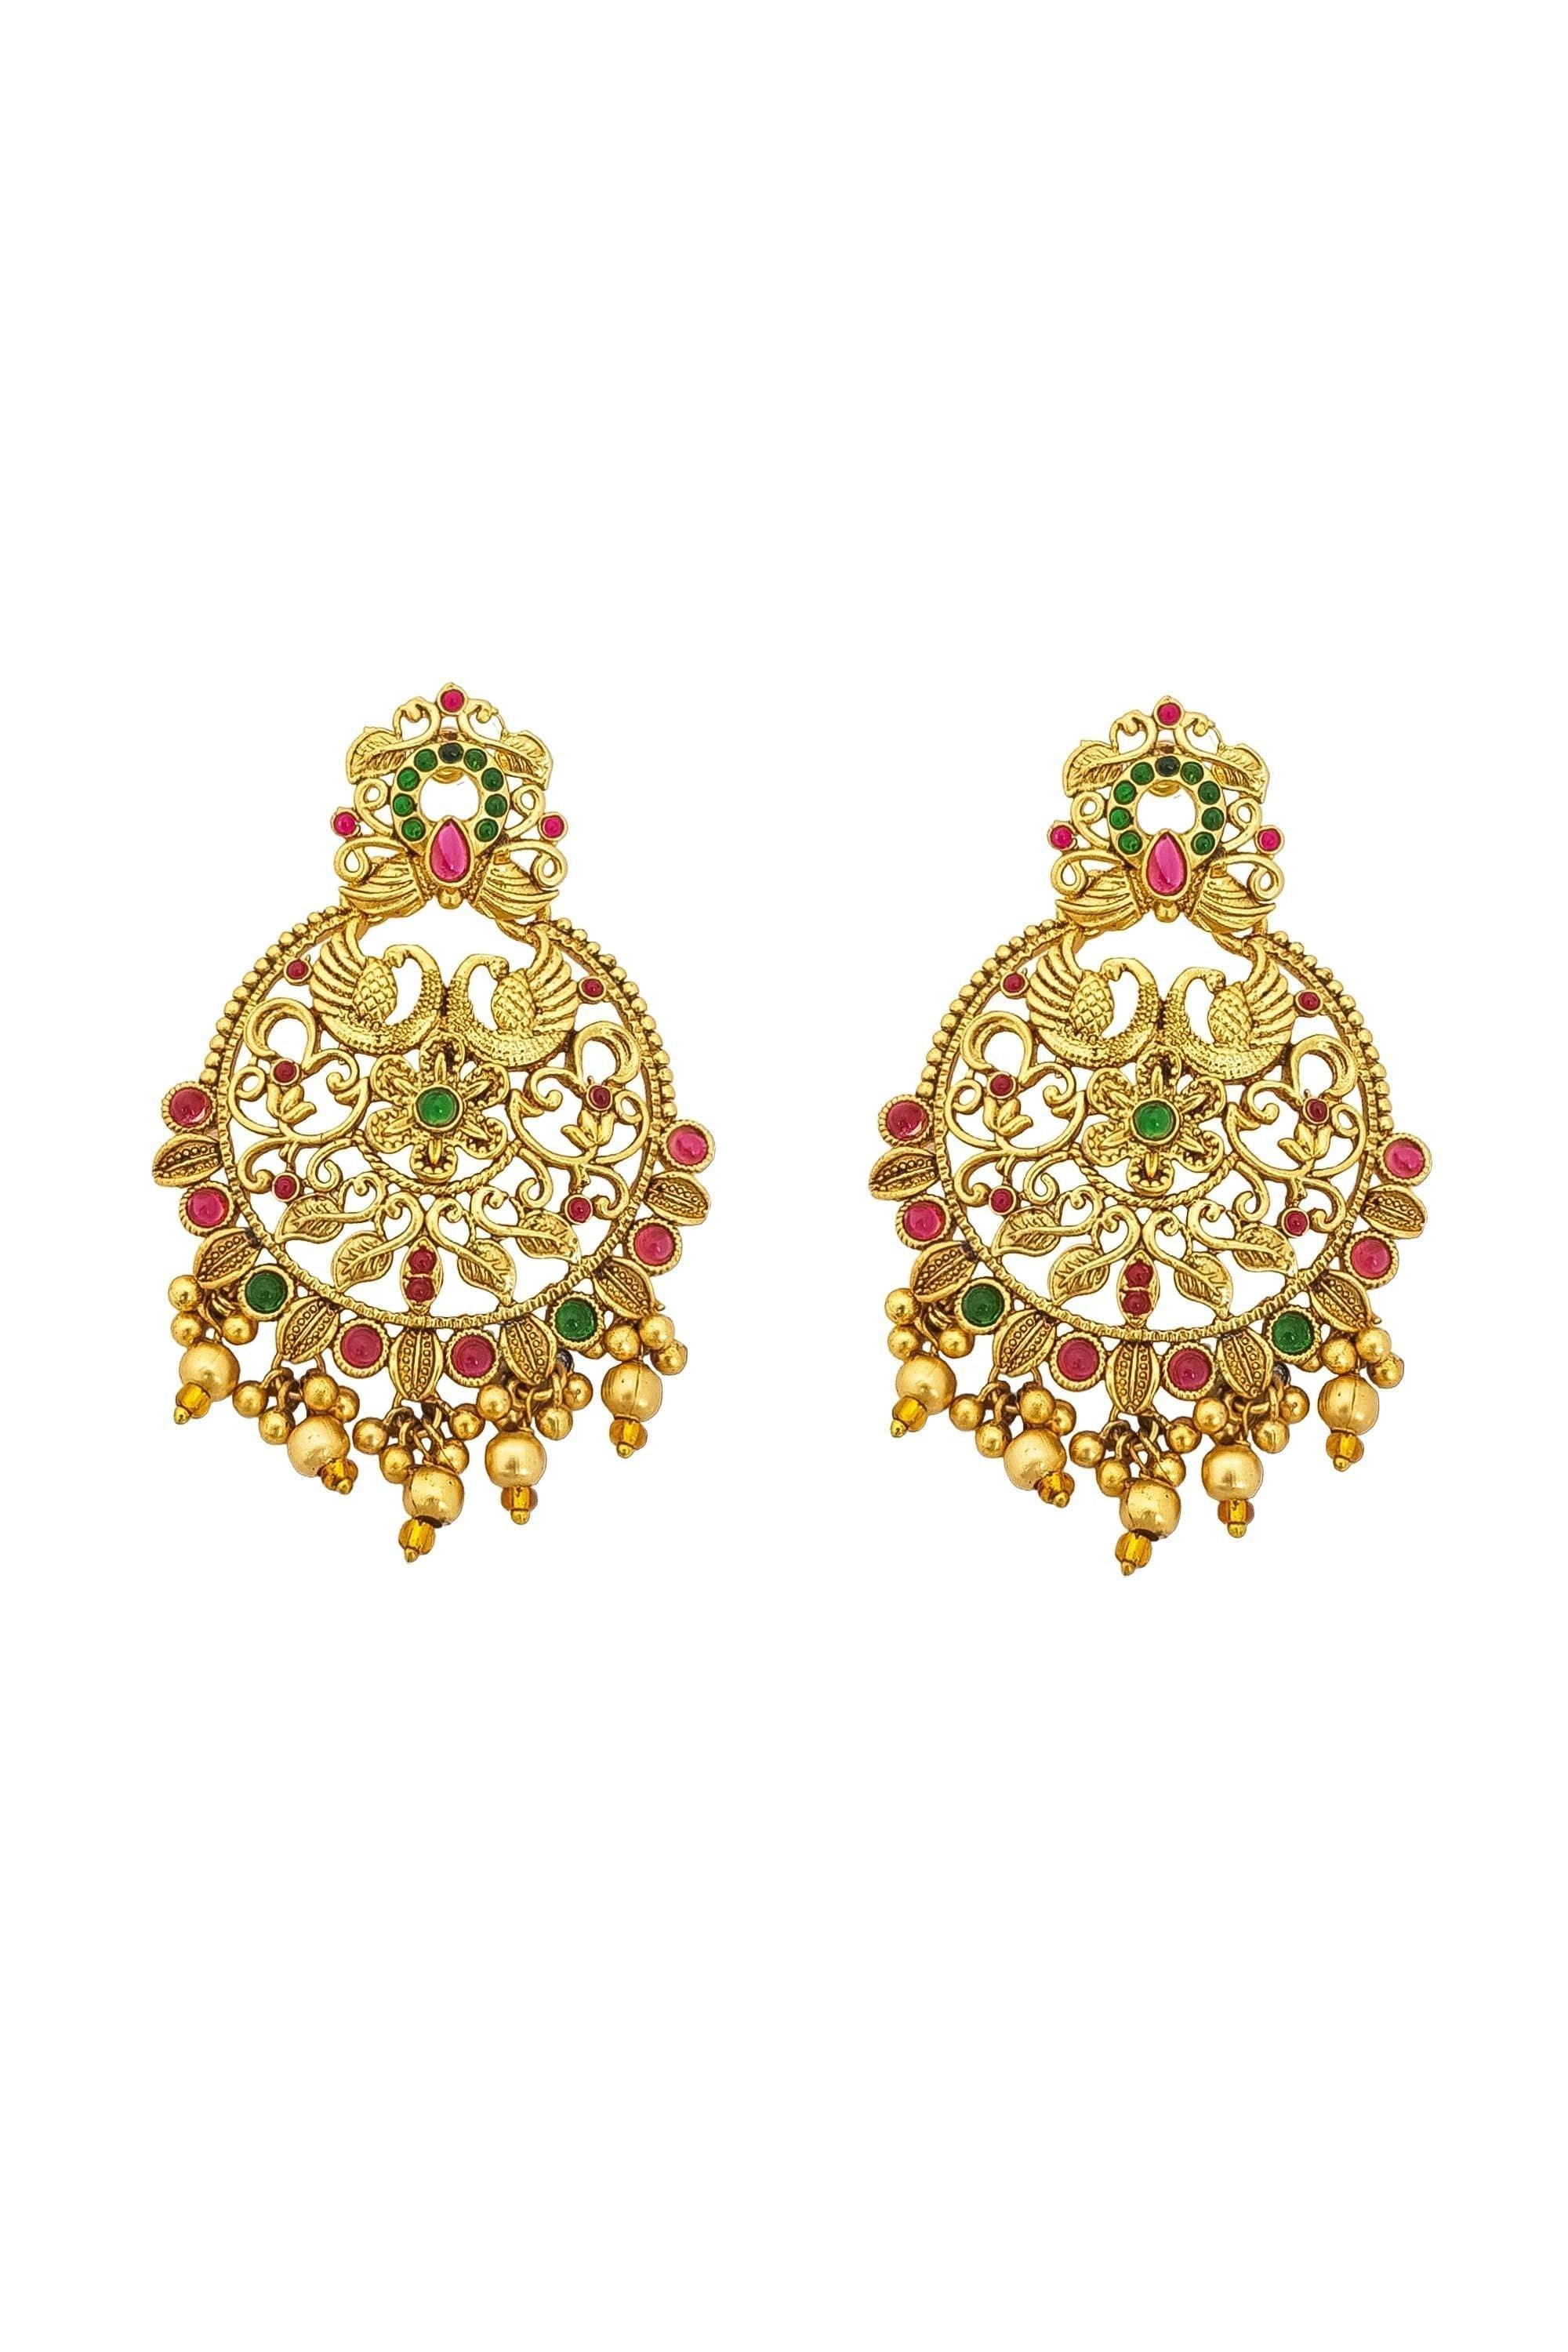 Gold Plated Temple Collection Earrings Jhumka - Griiham